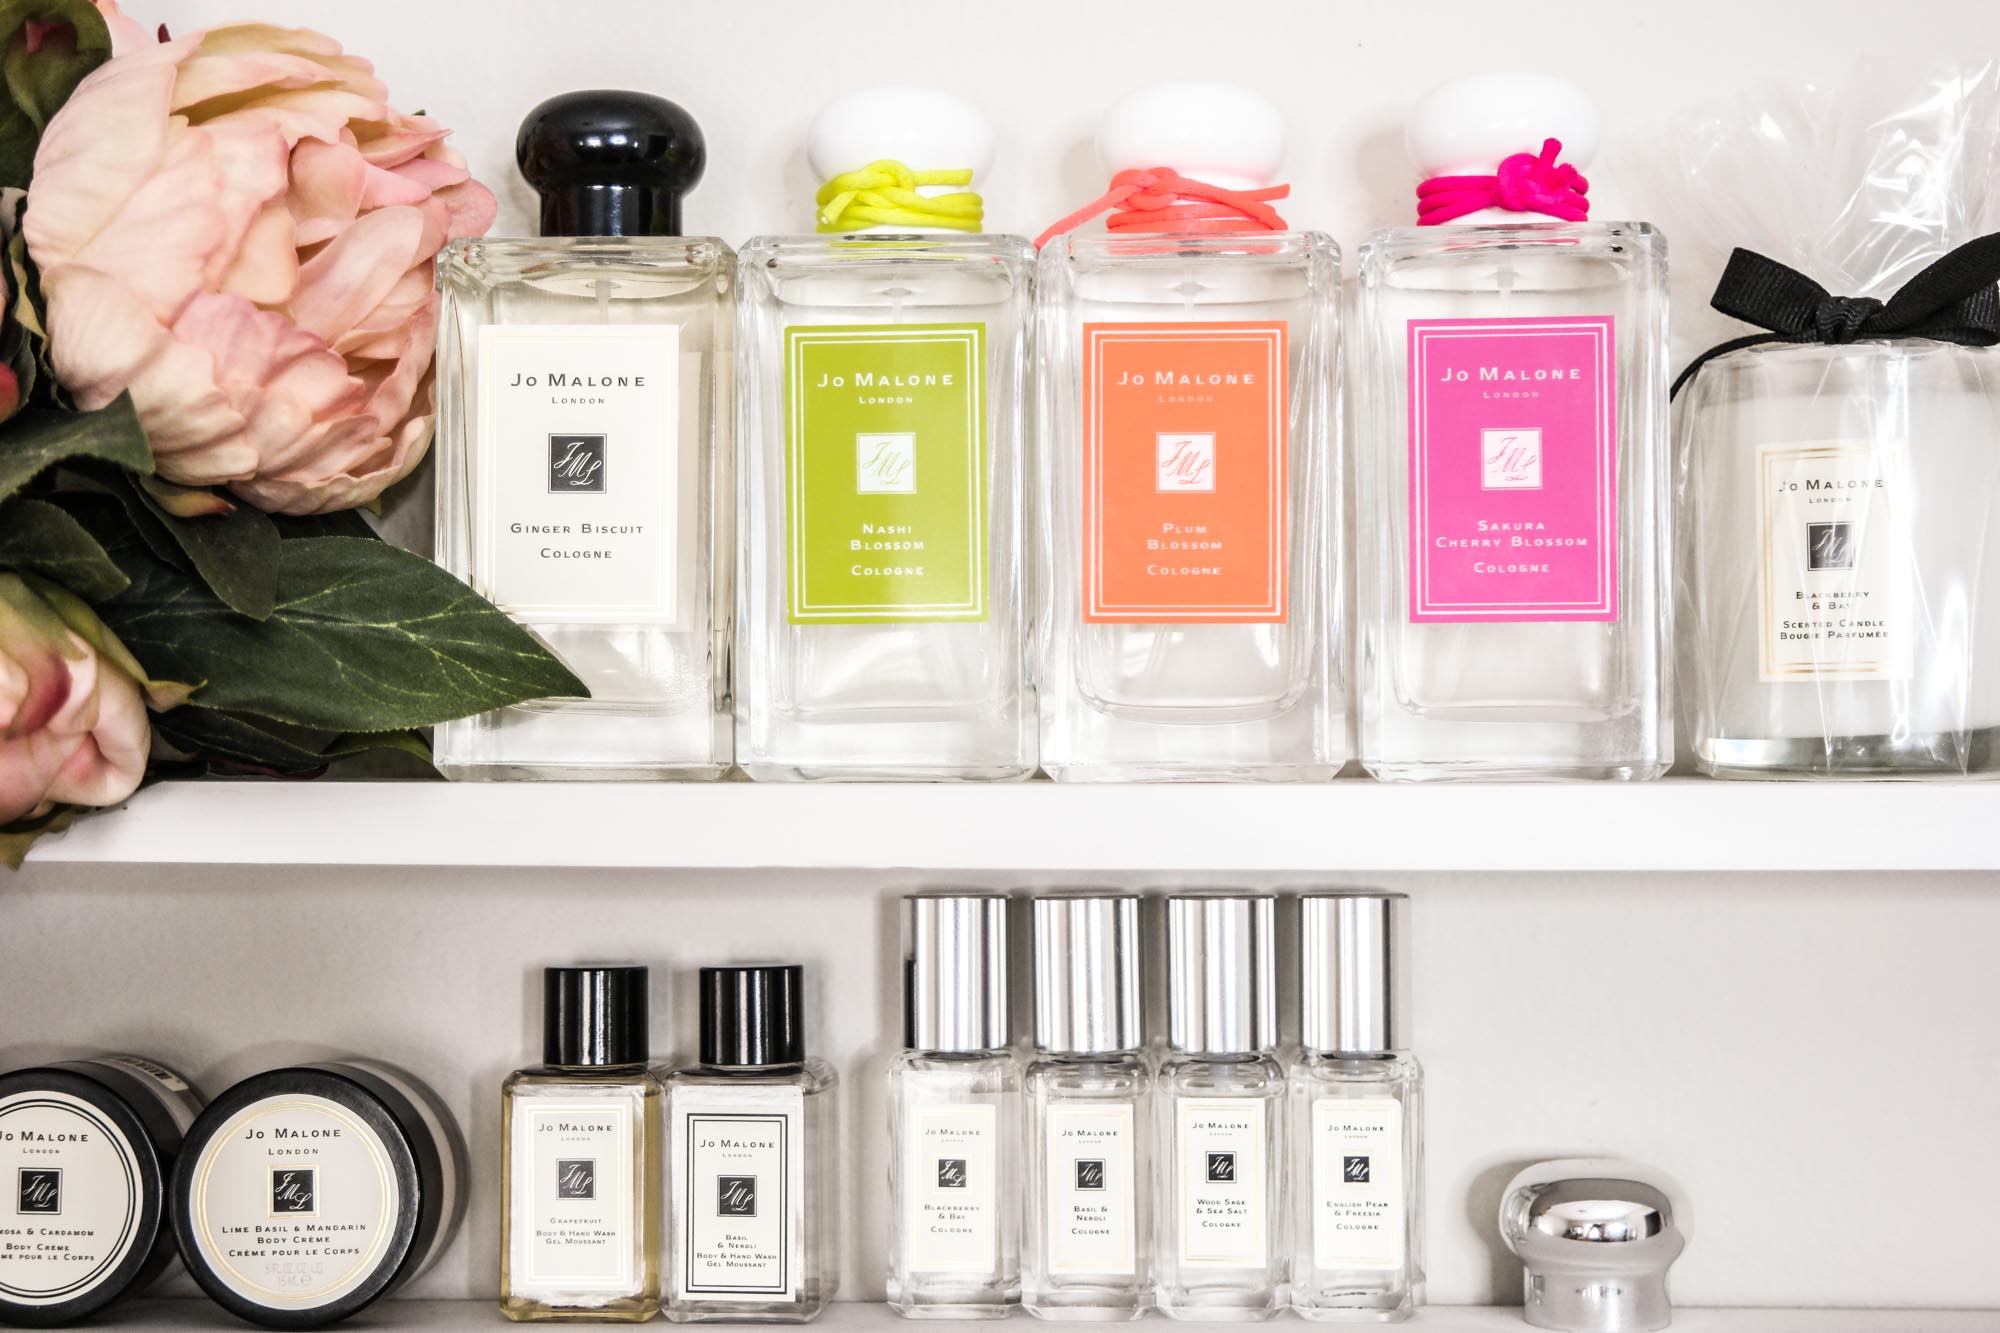 London Calling: The Jo Malone Archive & Blossom Girls Collection